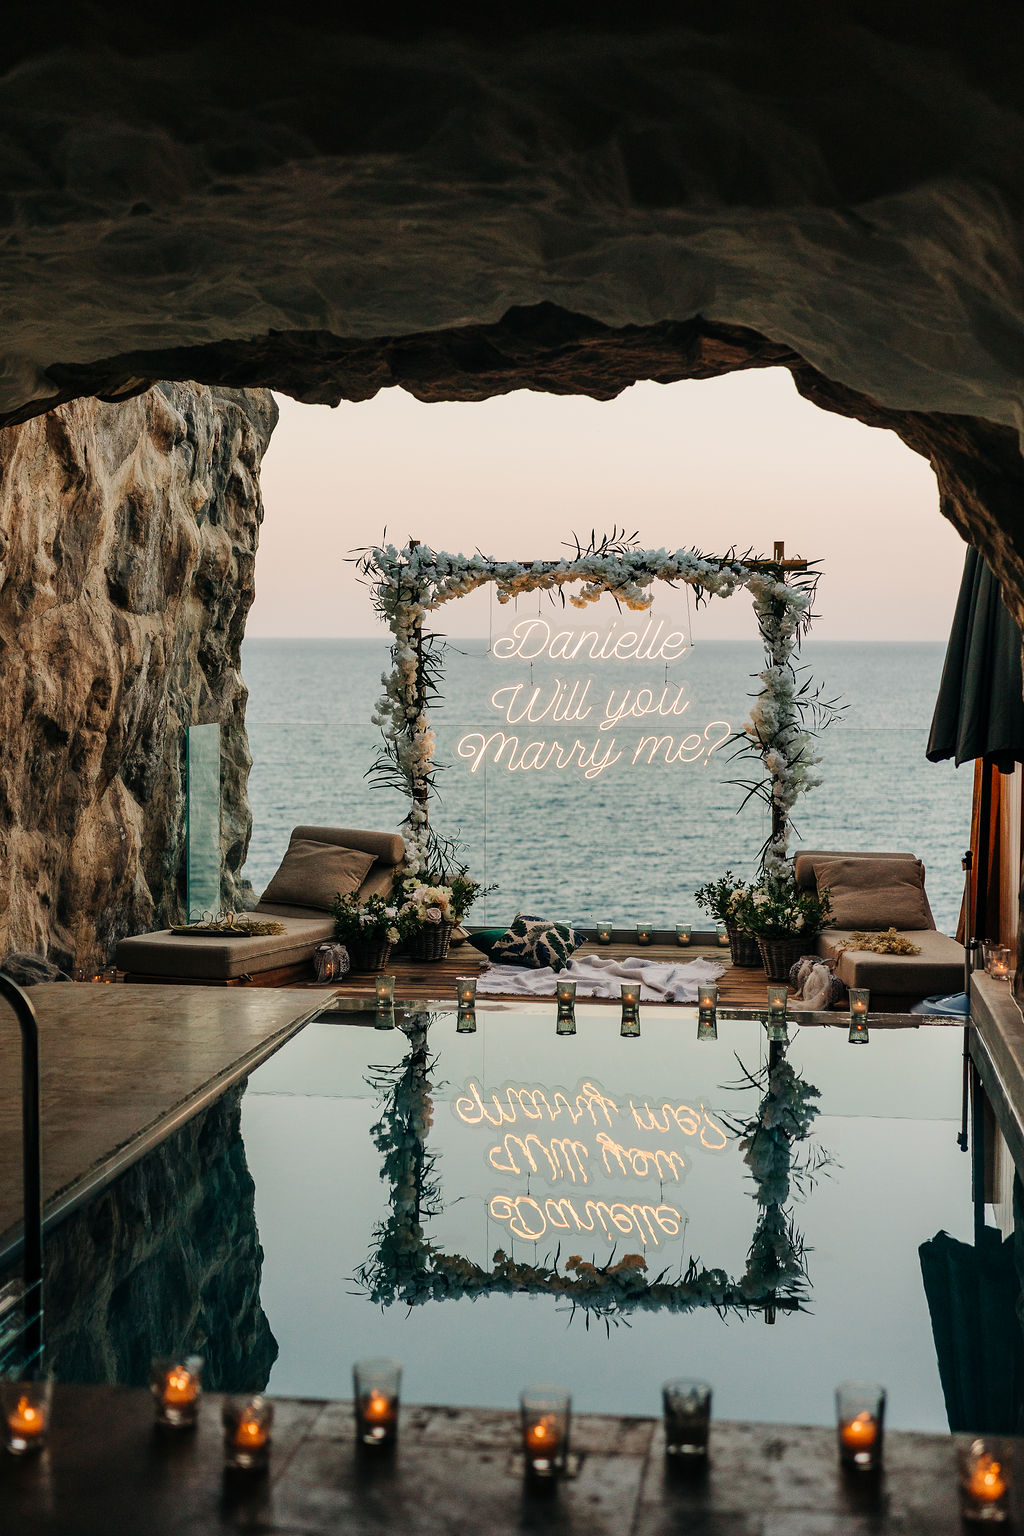 4 location ideas for your Crete marriage proposal